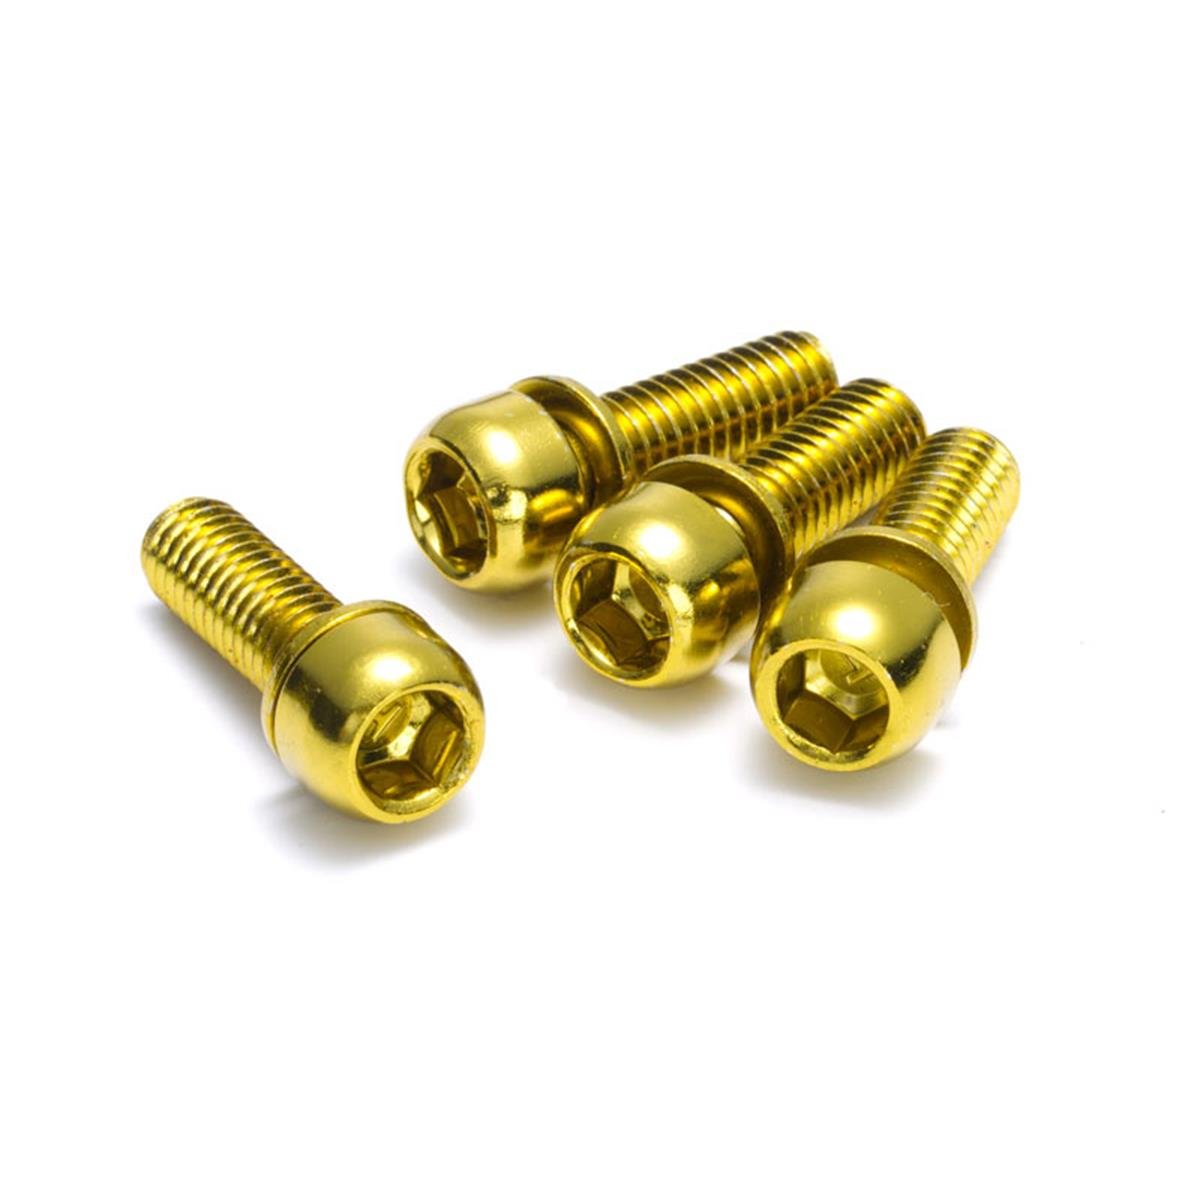 Reverse Components Brake Adapter Screws  M6x18mm, 4 Pack, Gold